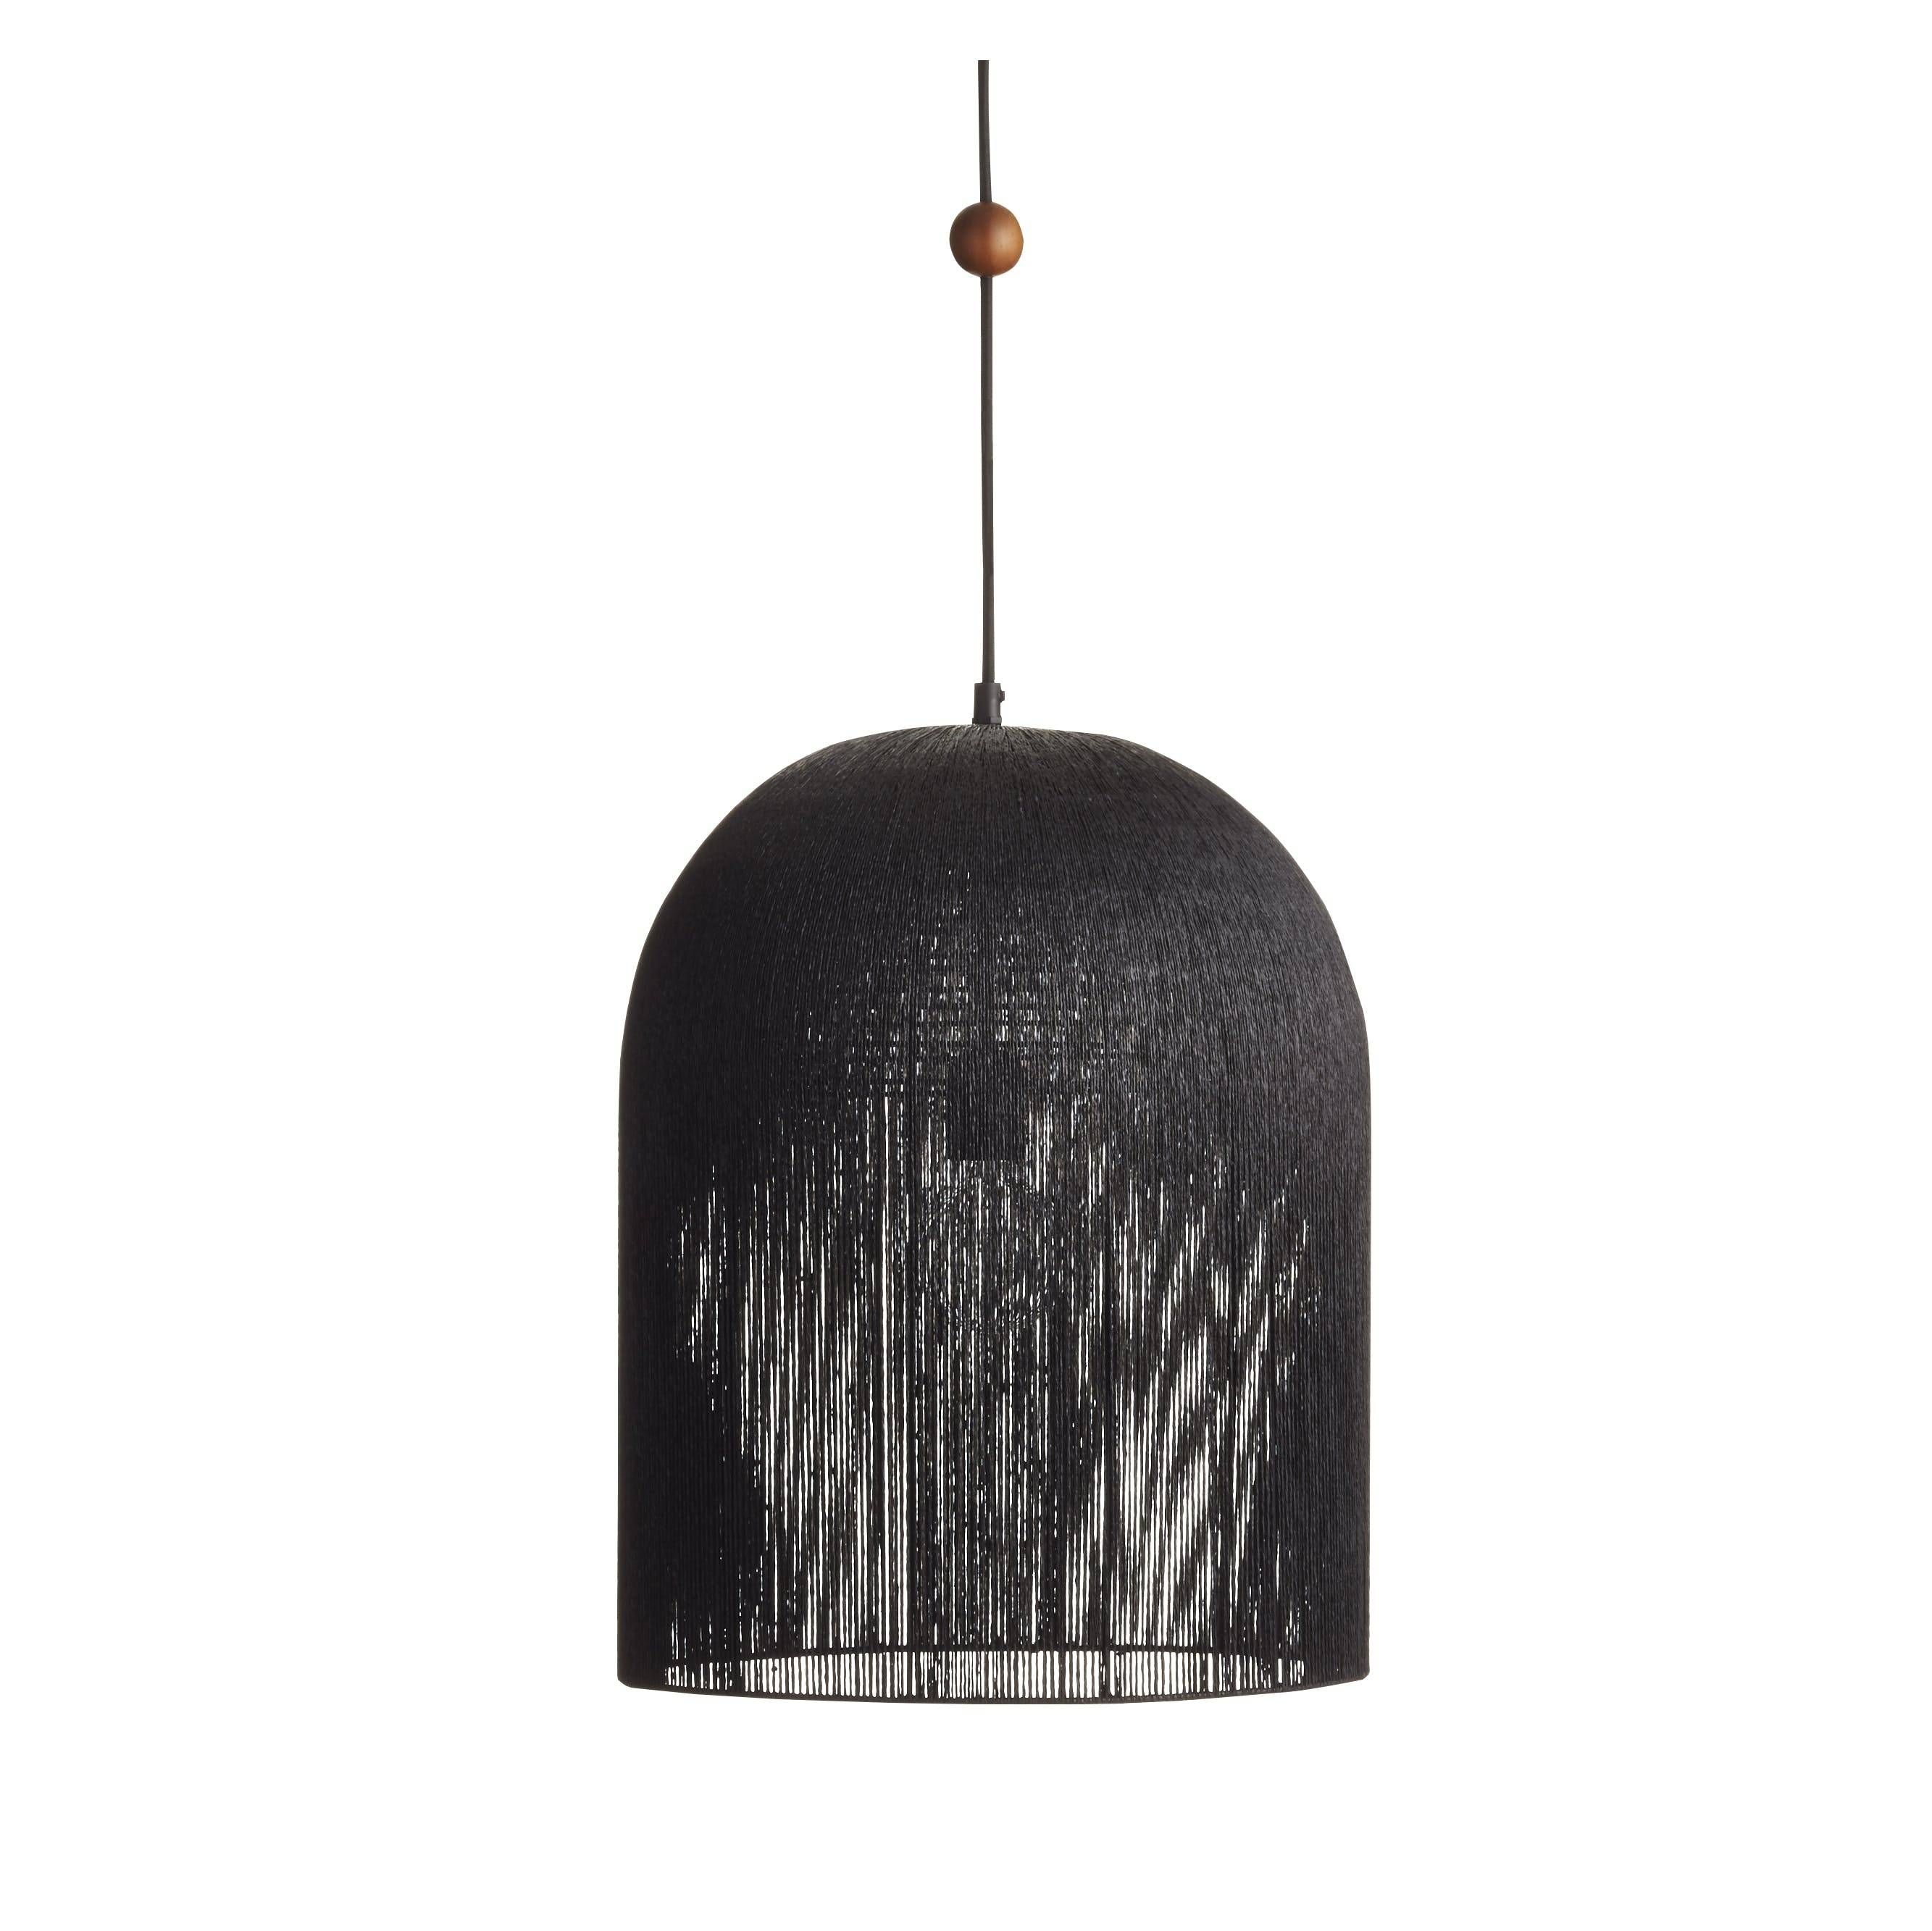 15 Best Collection of Cb2 Pendant Lighting